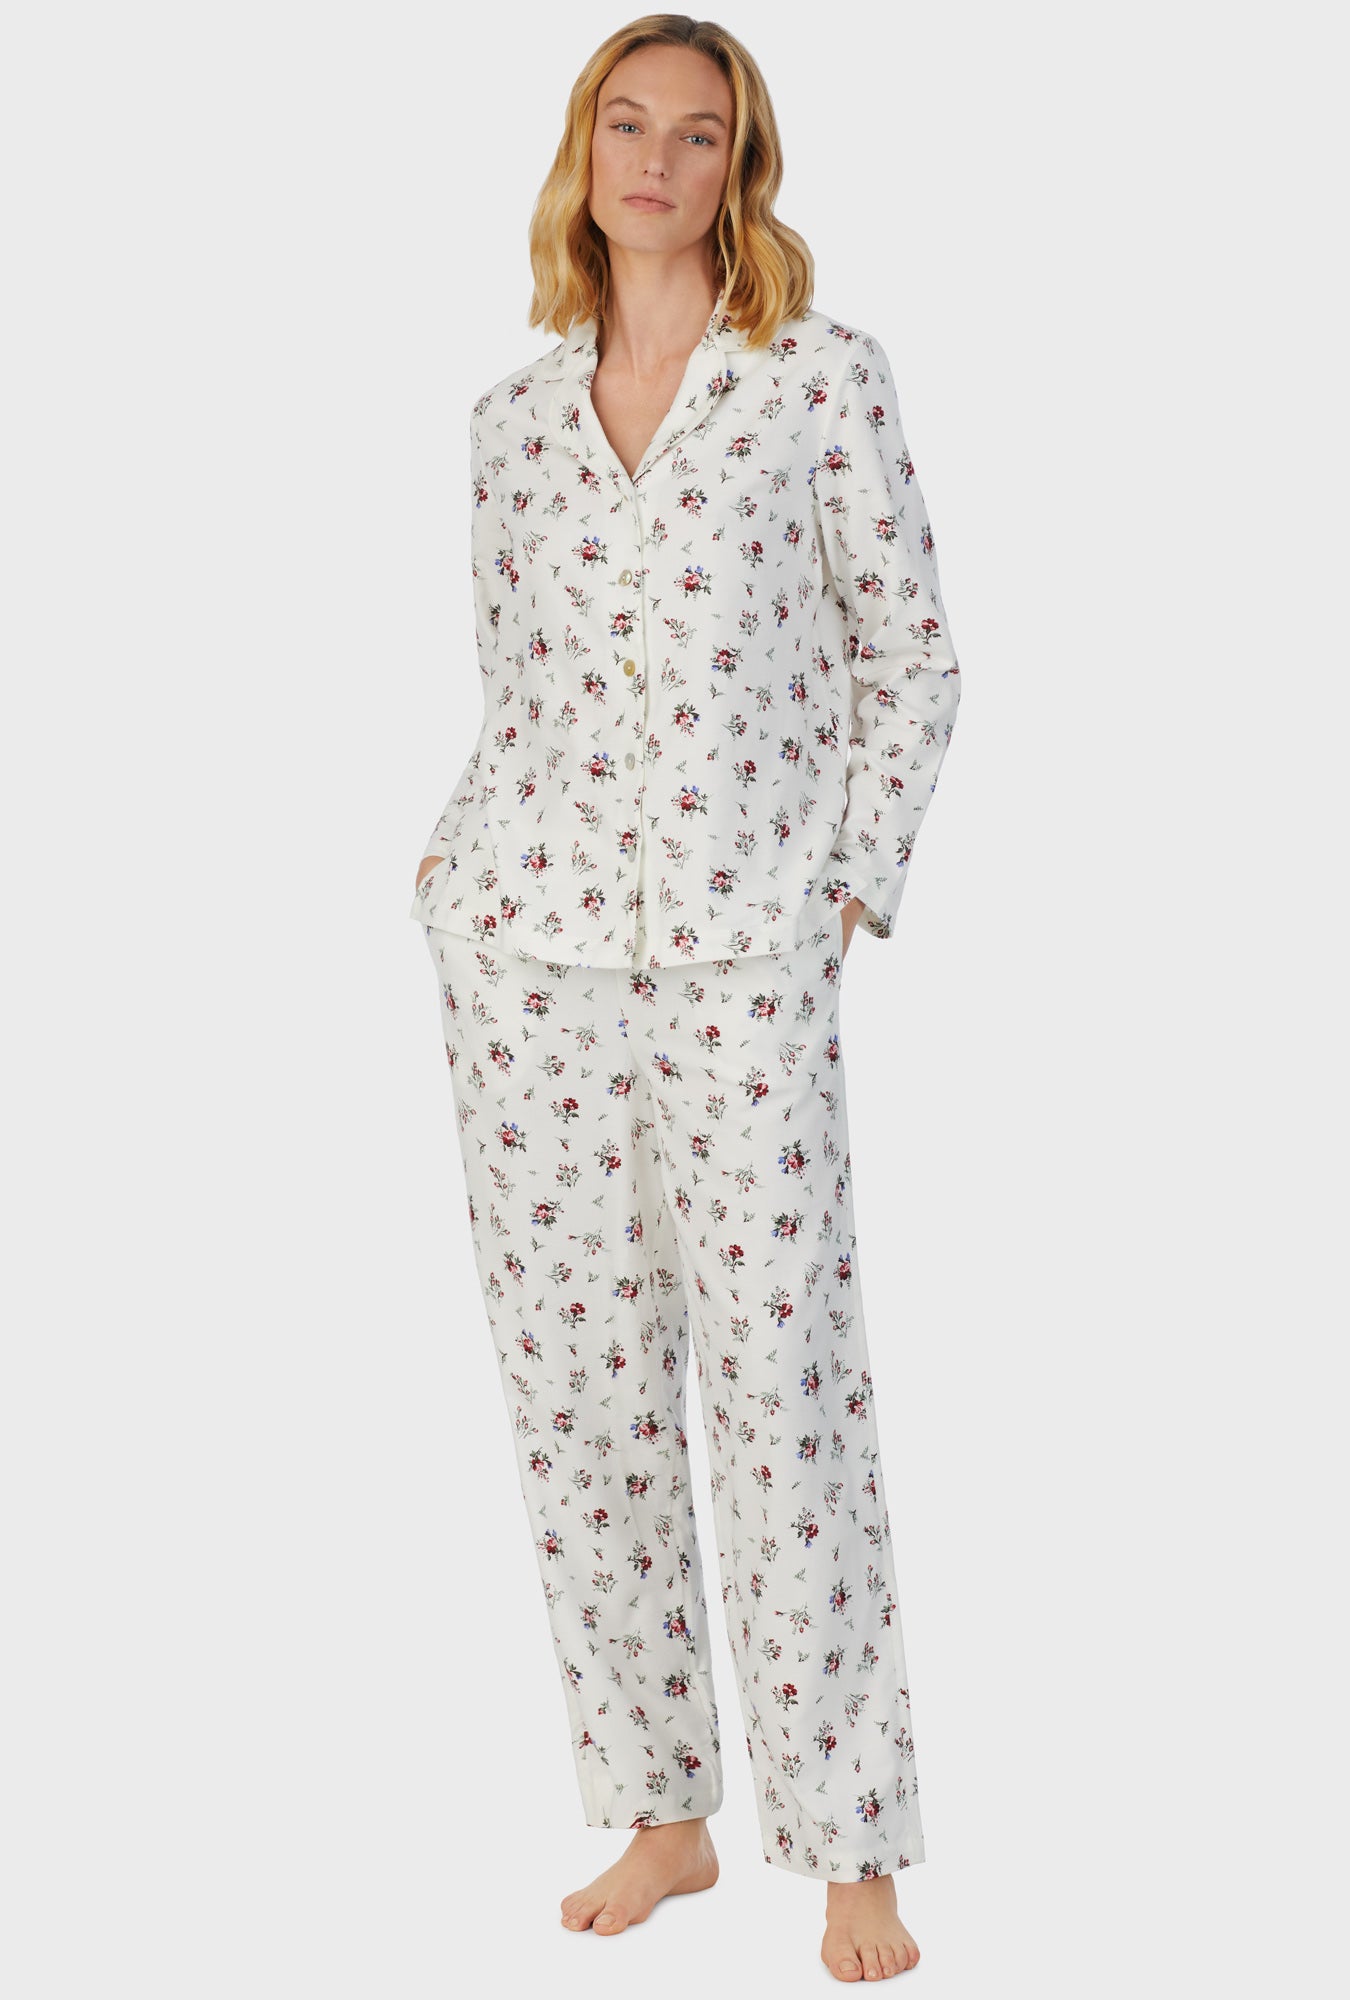 A lady wearing white long sleeve cotton rayon flannel wild flower pajama set.